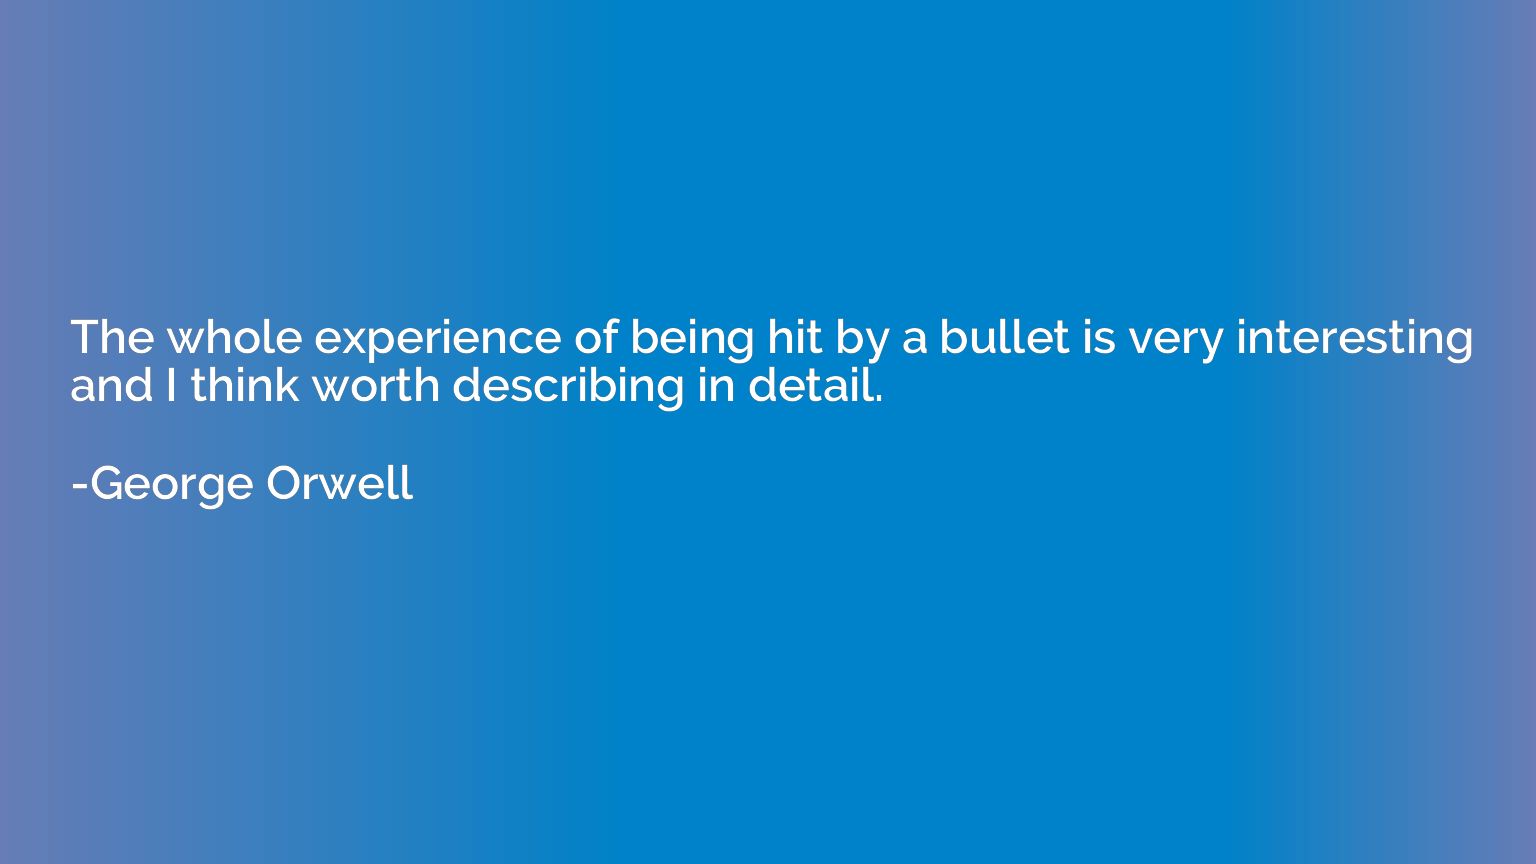 The whole experience of being hit by a bullet is very intere